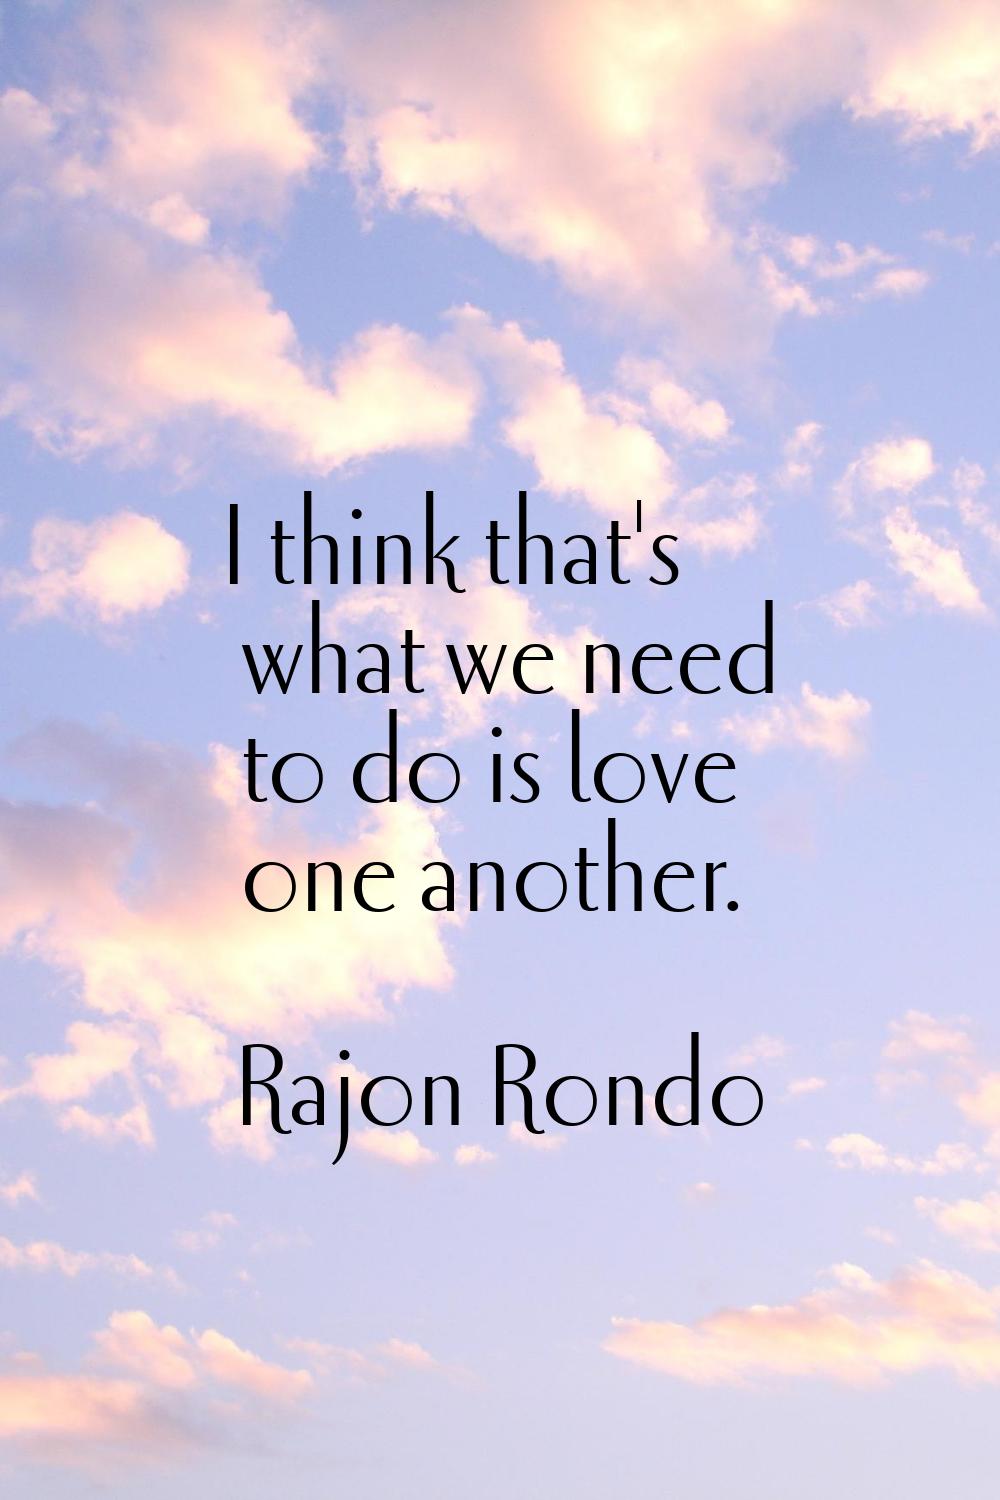 I think that's what we need to do is love one another.